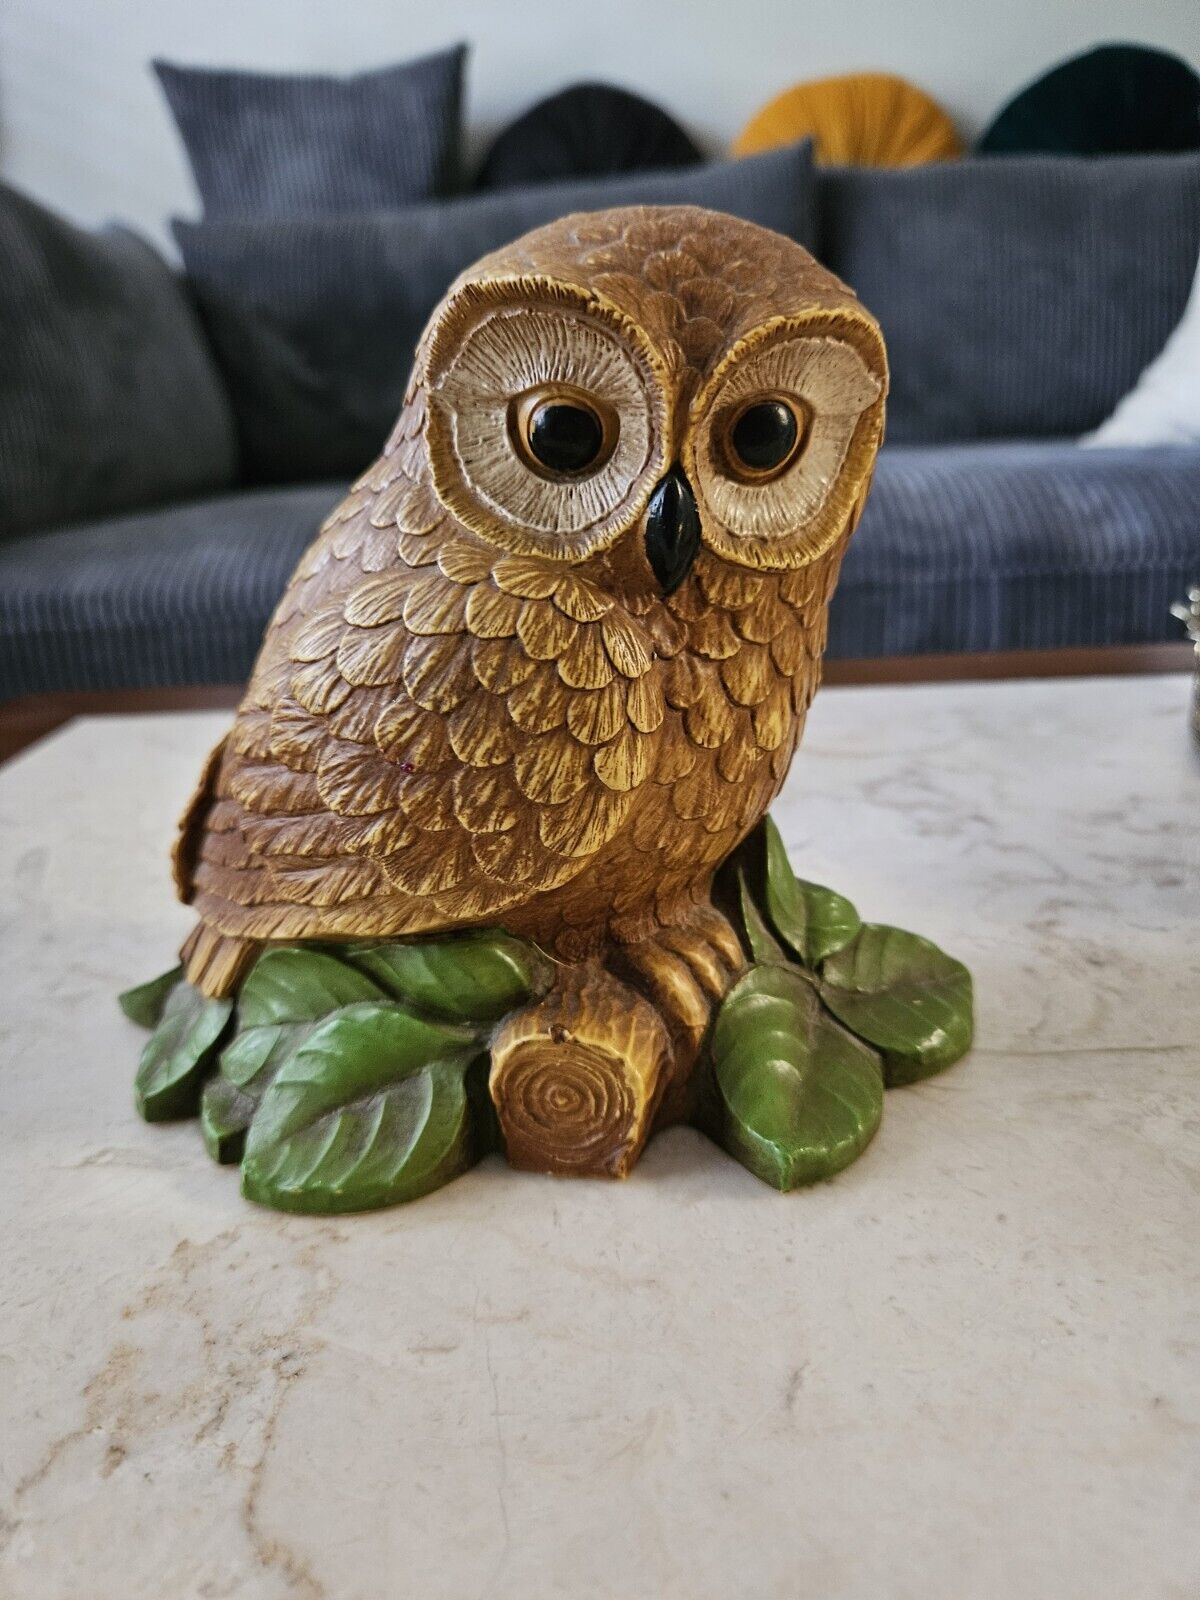 Vintage Hard Plastic Resin Perched Owl Statue Figure, Maybe Homeco? So Cute